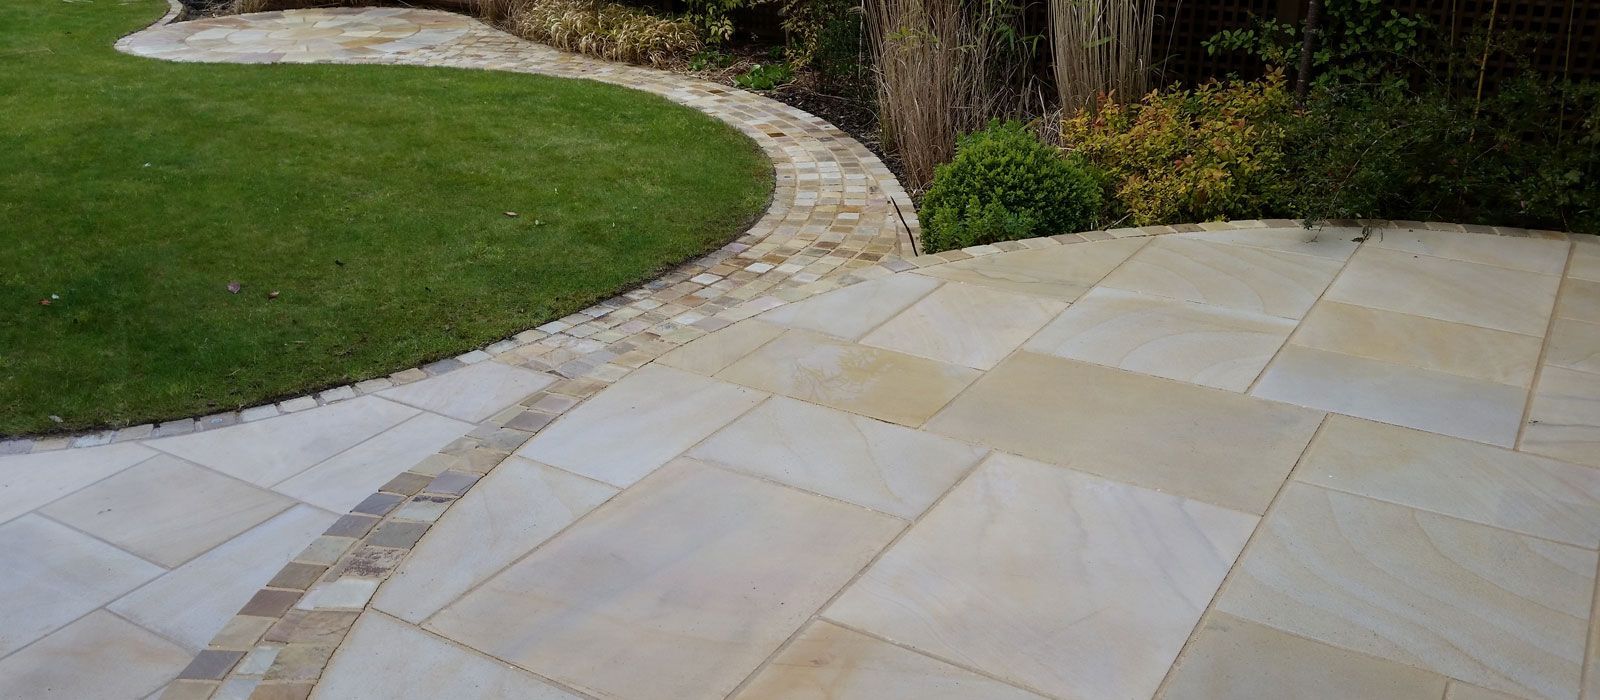 Natural stone patio cleaning service in Hull. Modern garden pressure washed and treated.